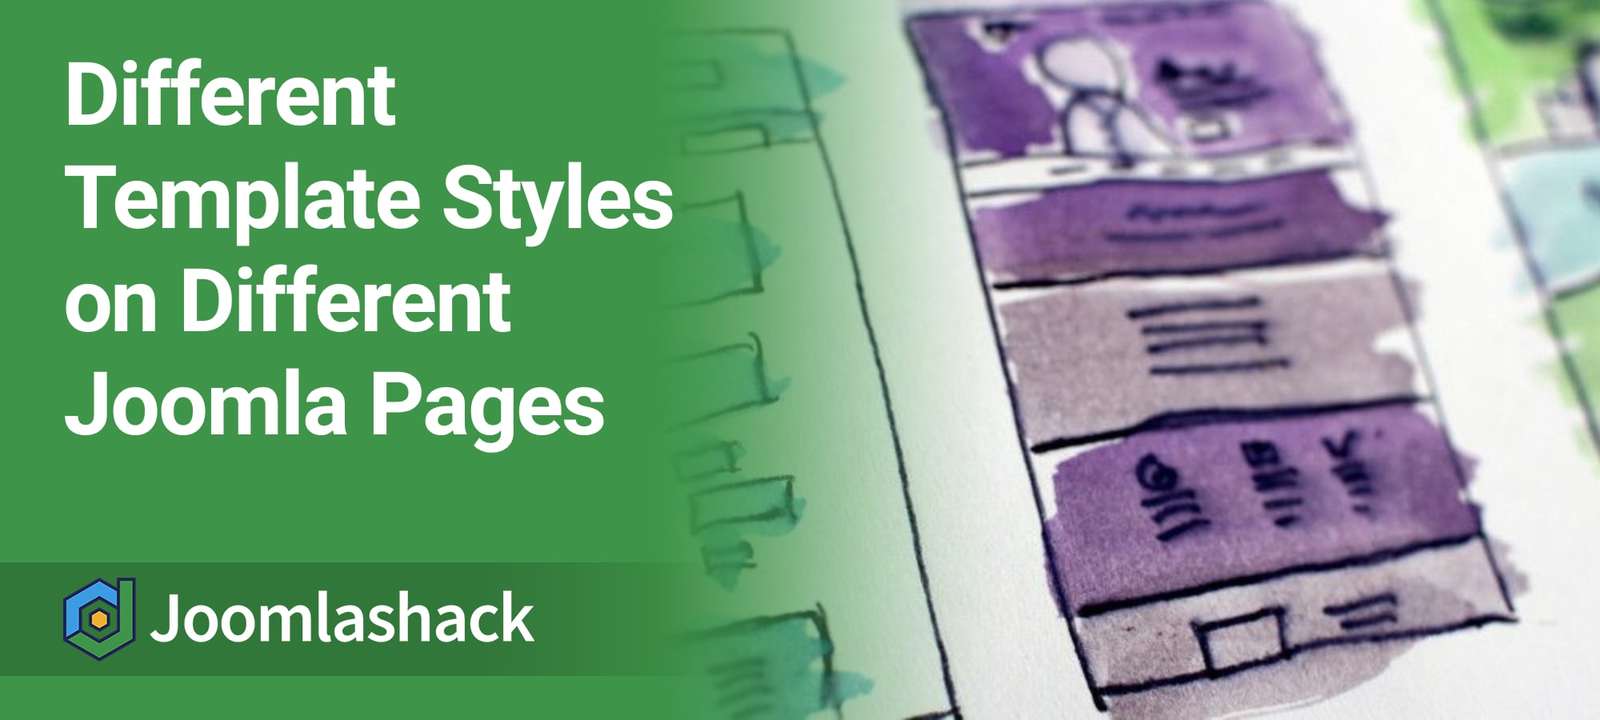 Show Different Joomla Template Styles on Different Pages